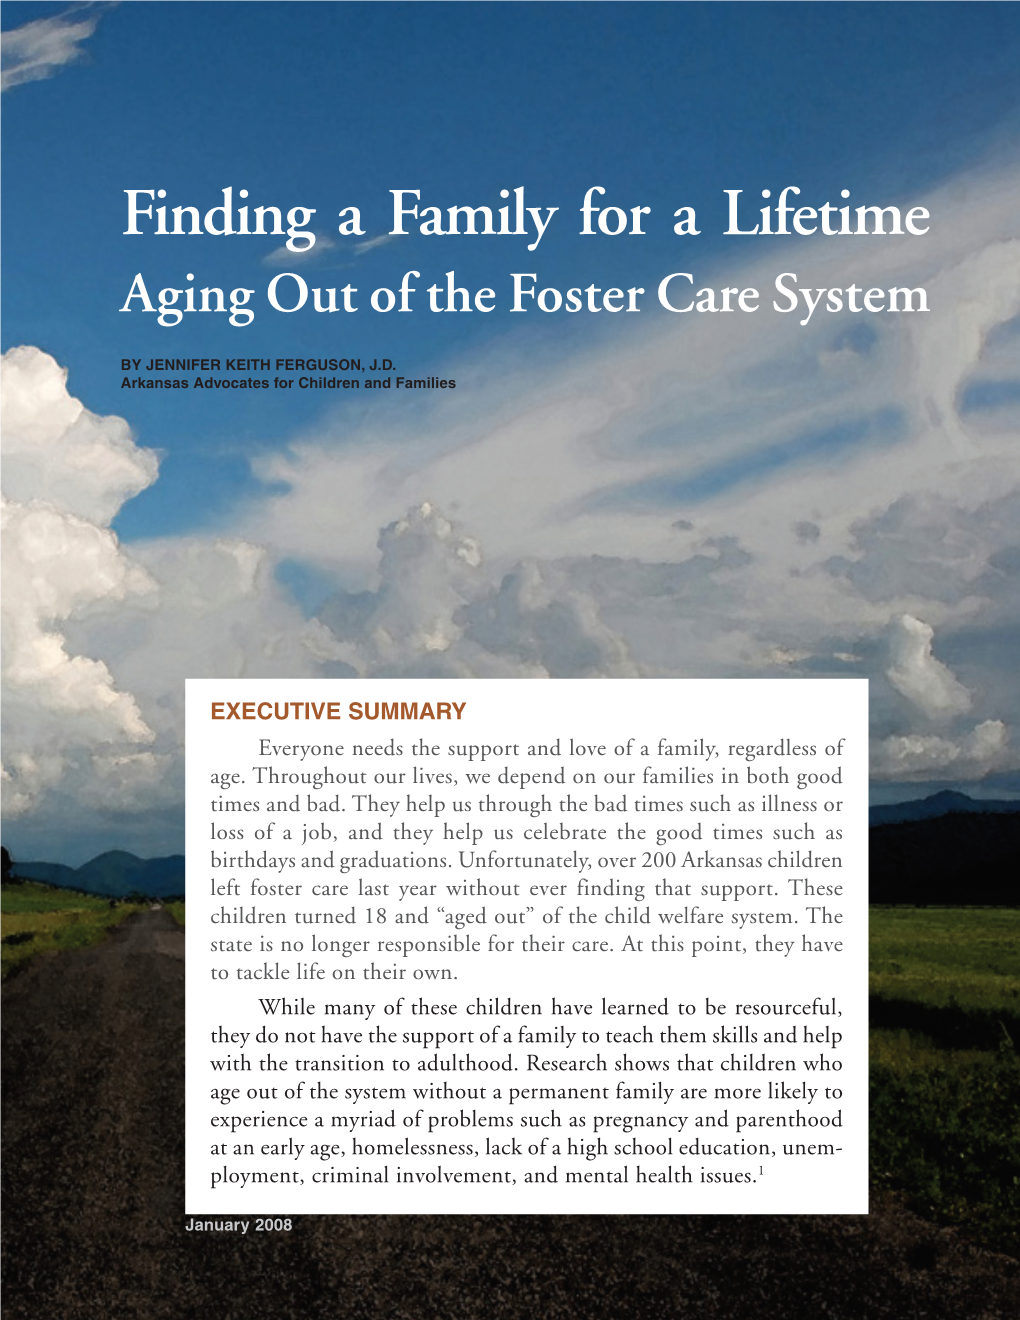 Aging out of the Foster Care System